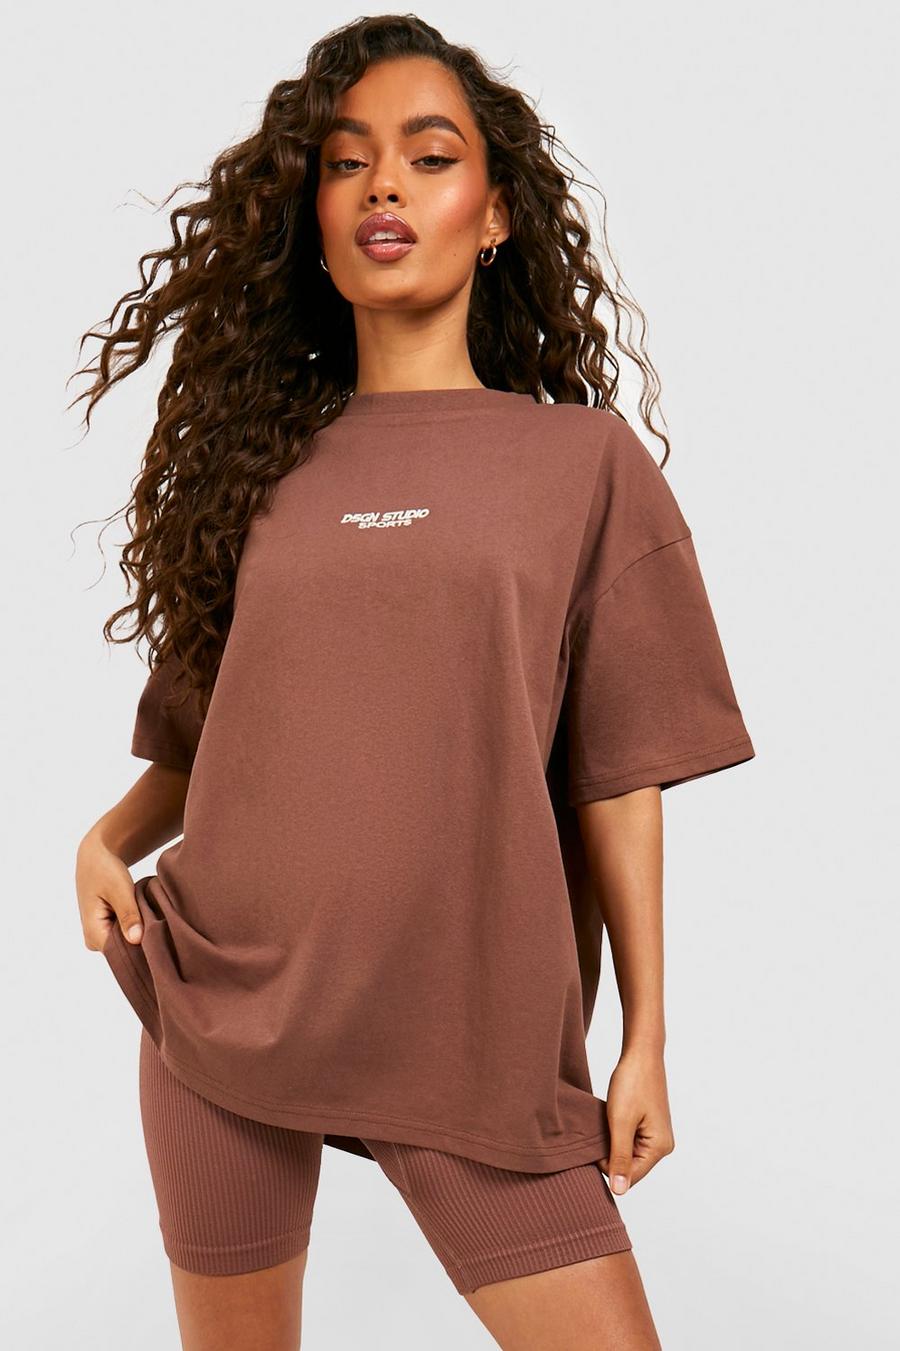 Chocolate brown Dsgn Studio Sports Embroidered Oversized T-Shirt